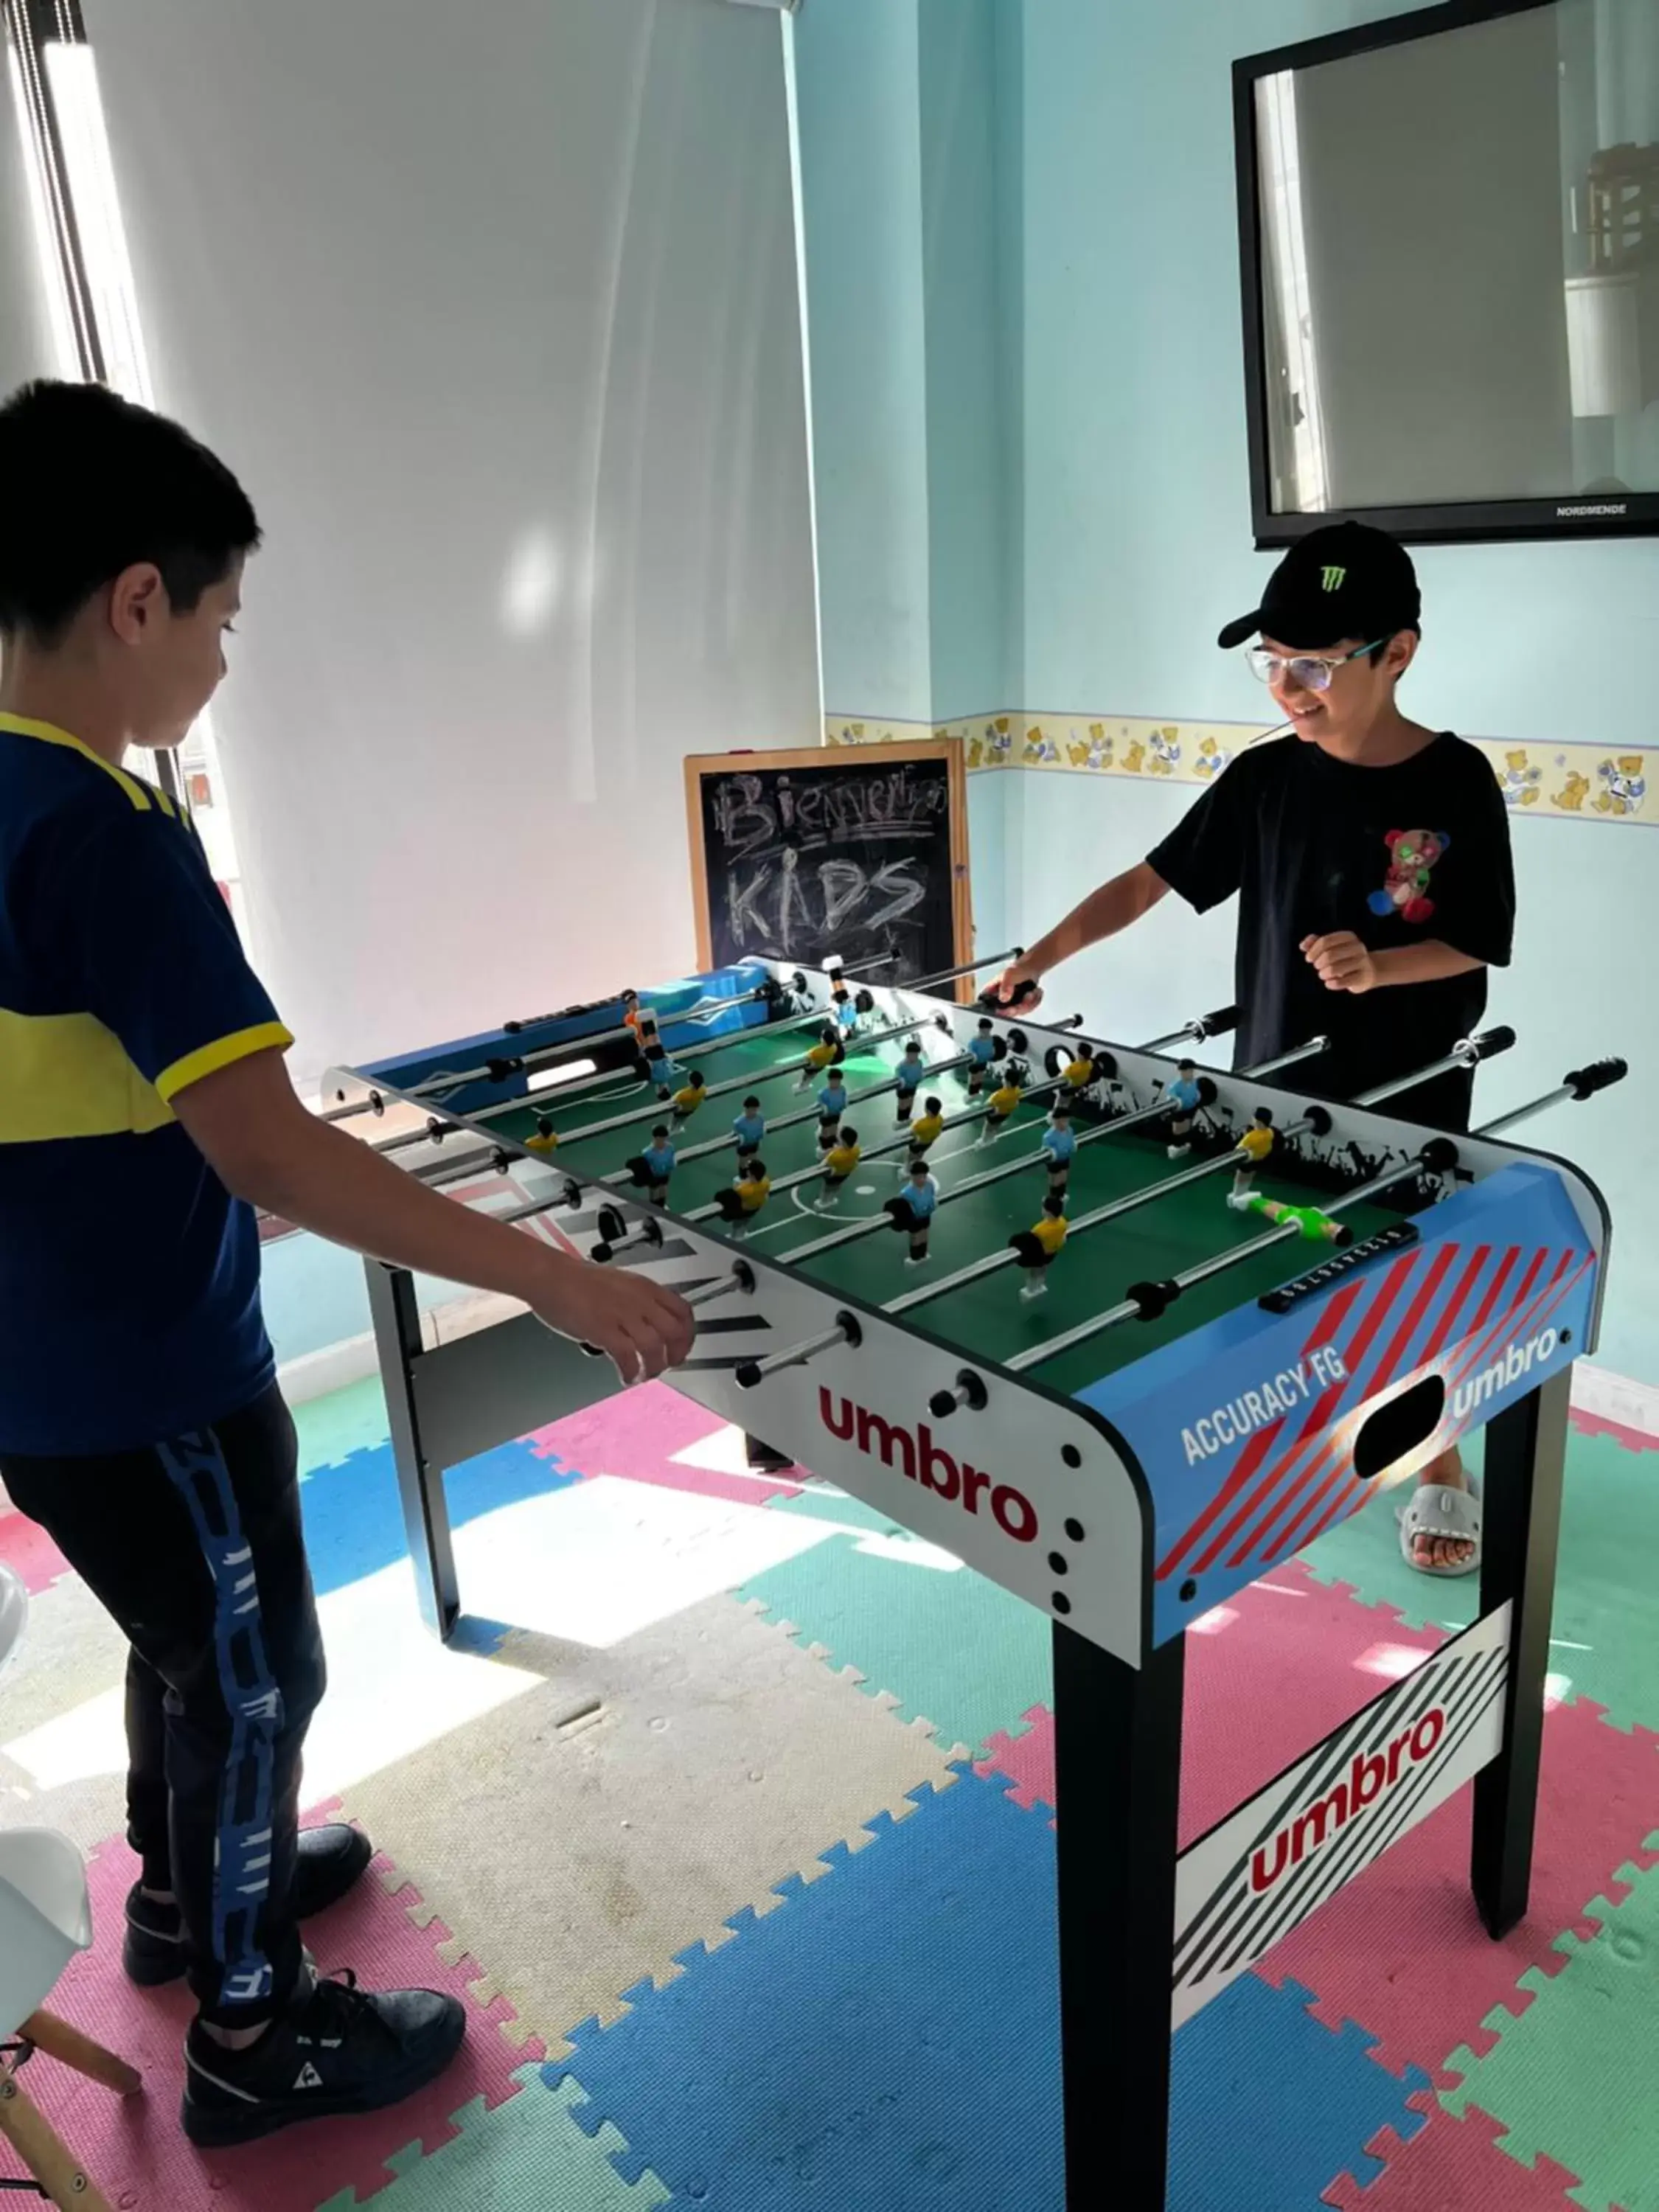 Game Room, Other Activities in Pocitos Plaza Hotel